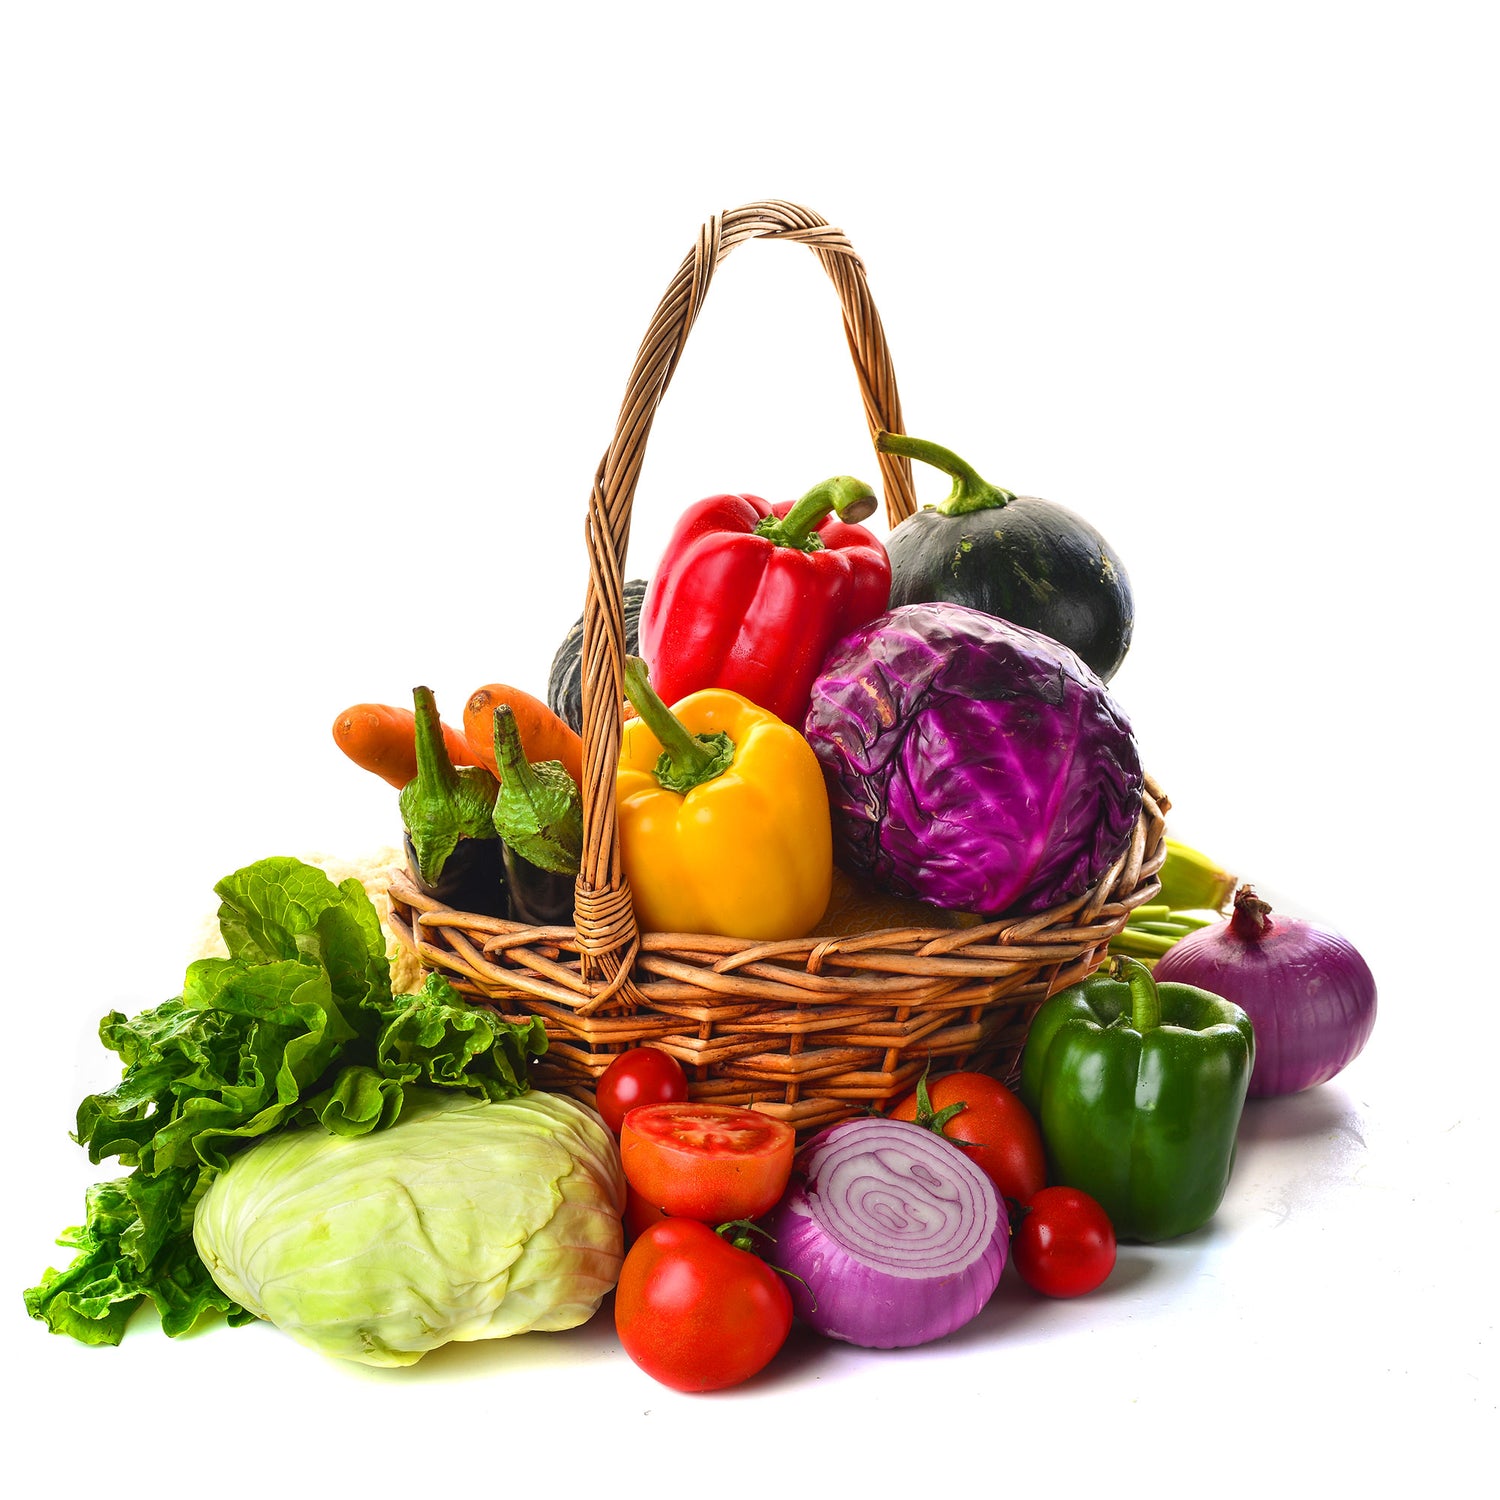 Early 'N' Fresh - Delivering fresh fruits and vegetables to your doorstep